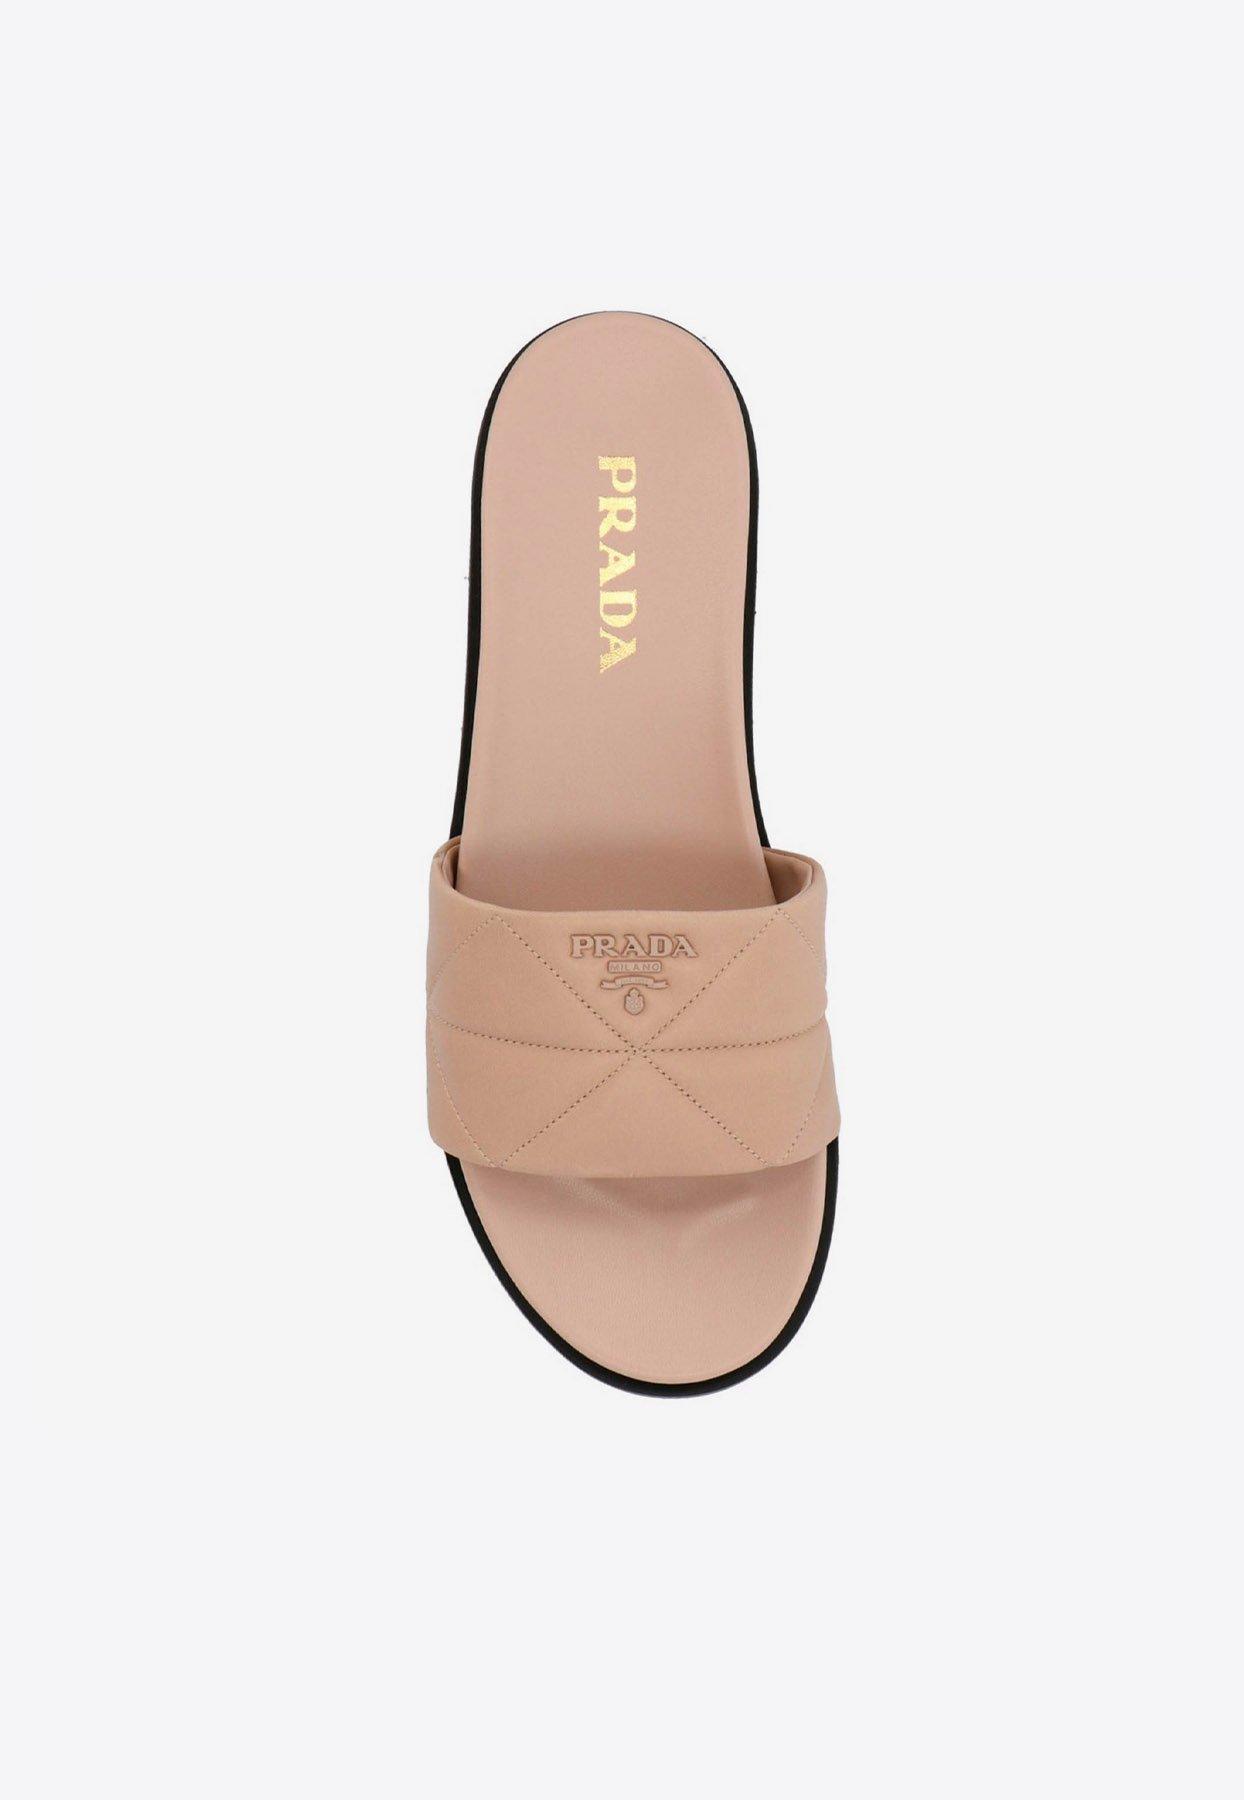 Prada Mules In Quilted Nappa 36 Leather in Beige (Pink) - Lyst